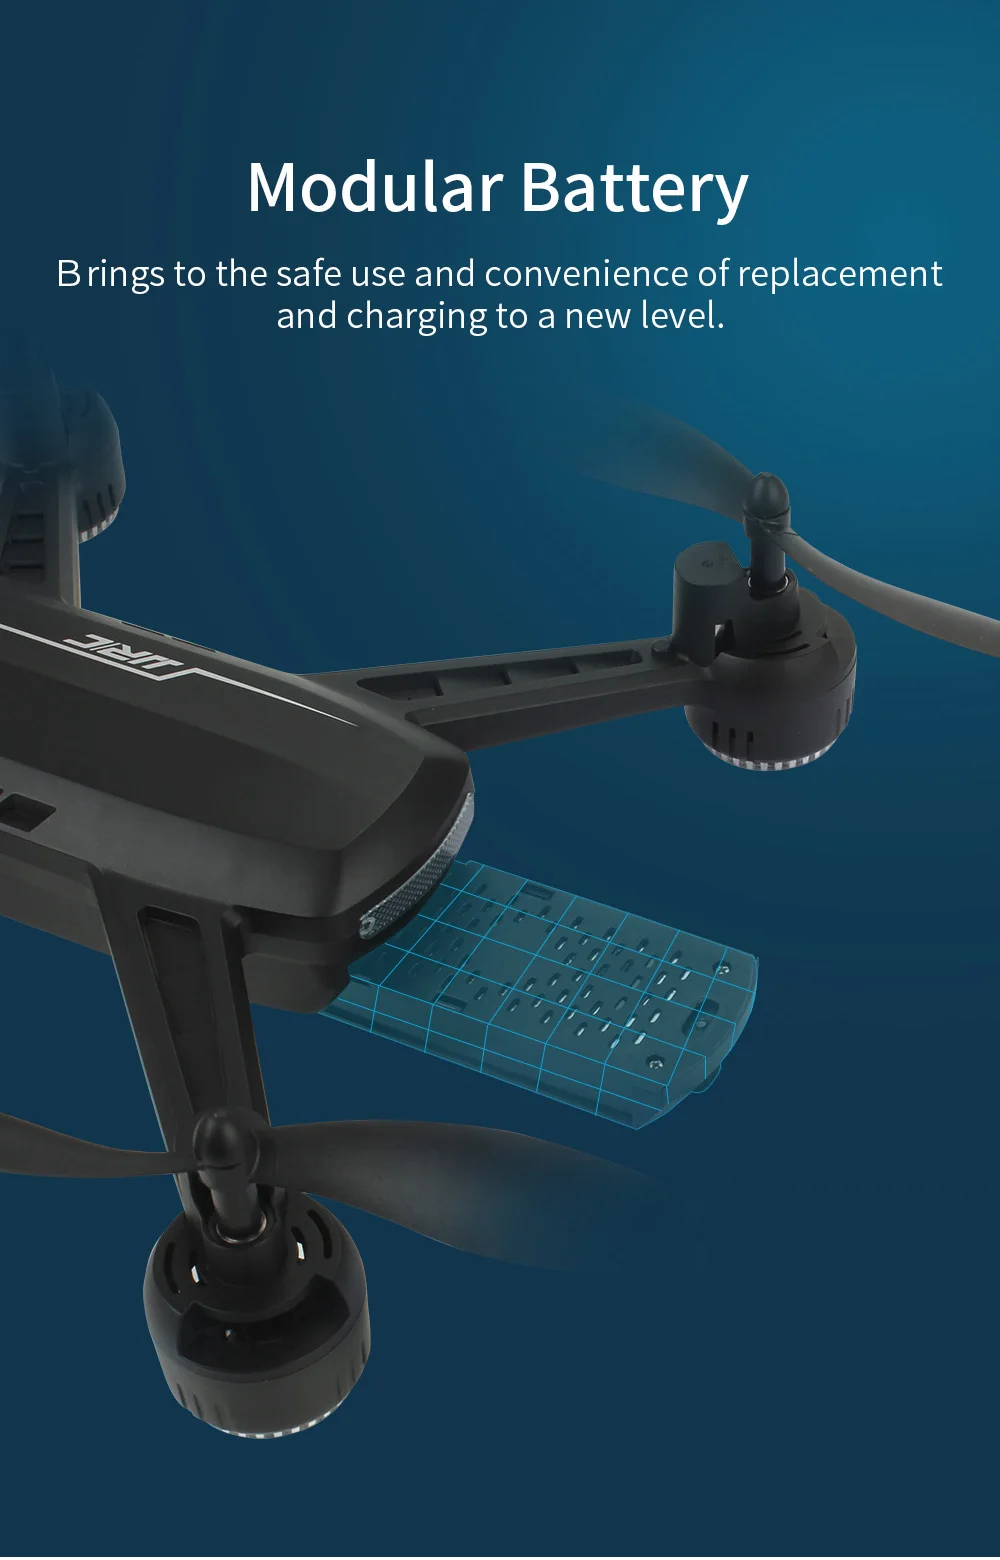 JJRC H86 Drone, modular battery brings to the safe use and convenience of replacement and charging to